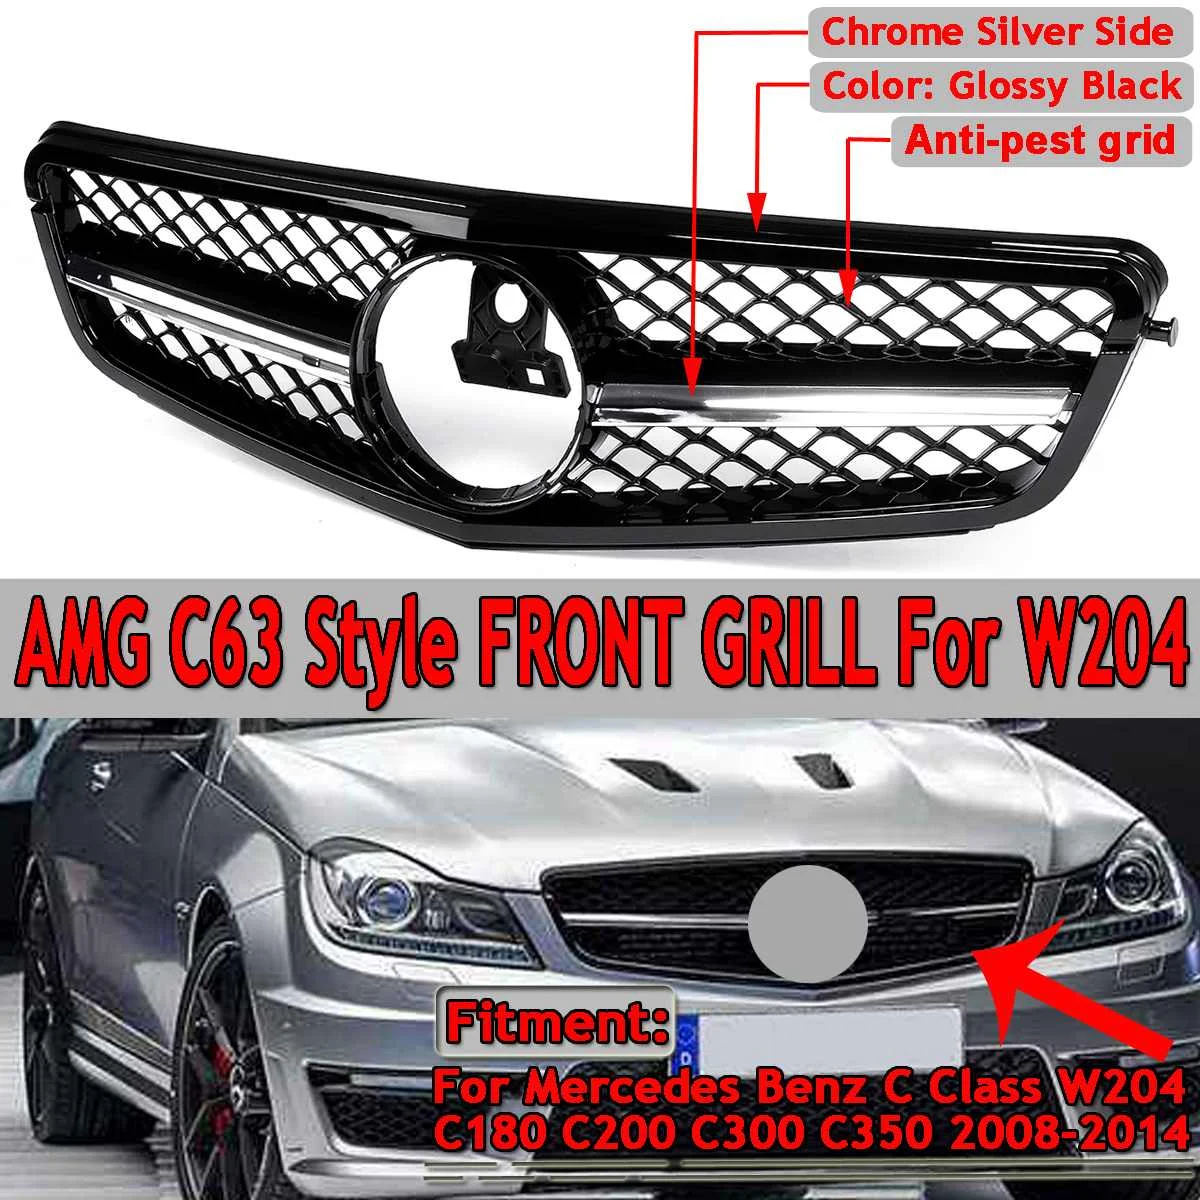 

For AMG C63 Style New Car Front Upper Grille Grill For Mercedes For Benz C Class W204 C180 C200 C300 C350 2008-14 Racing Grille